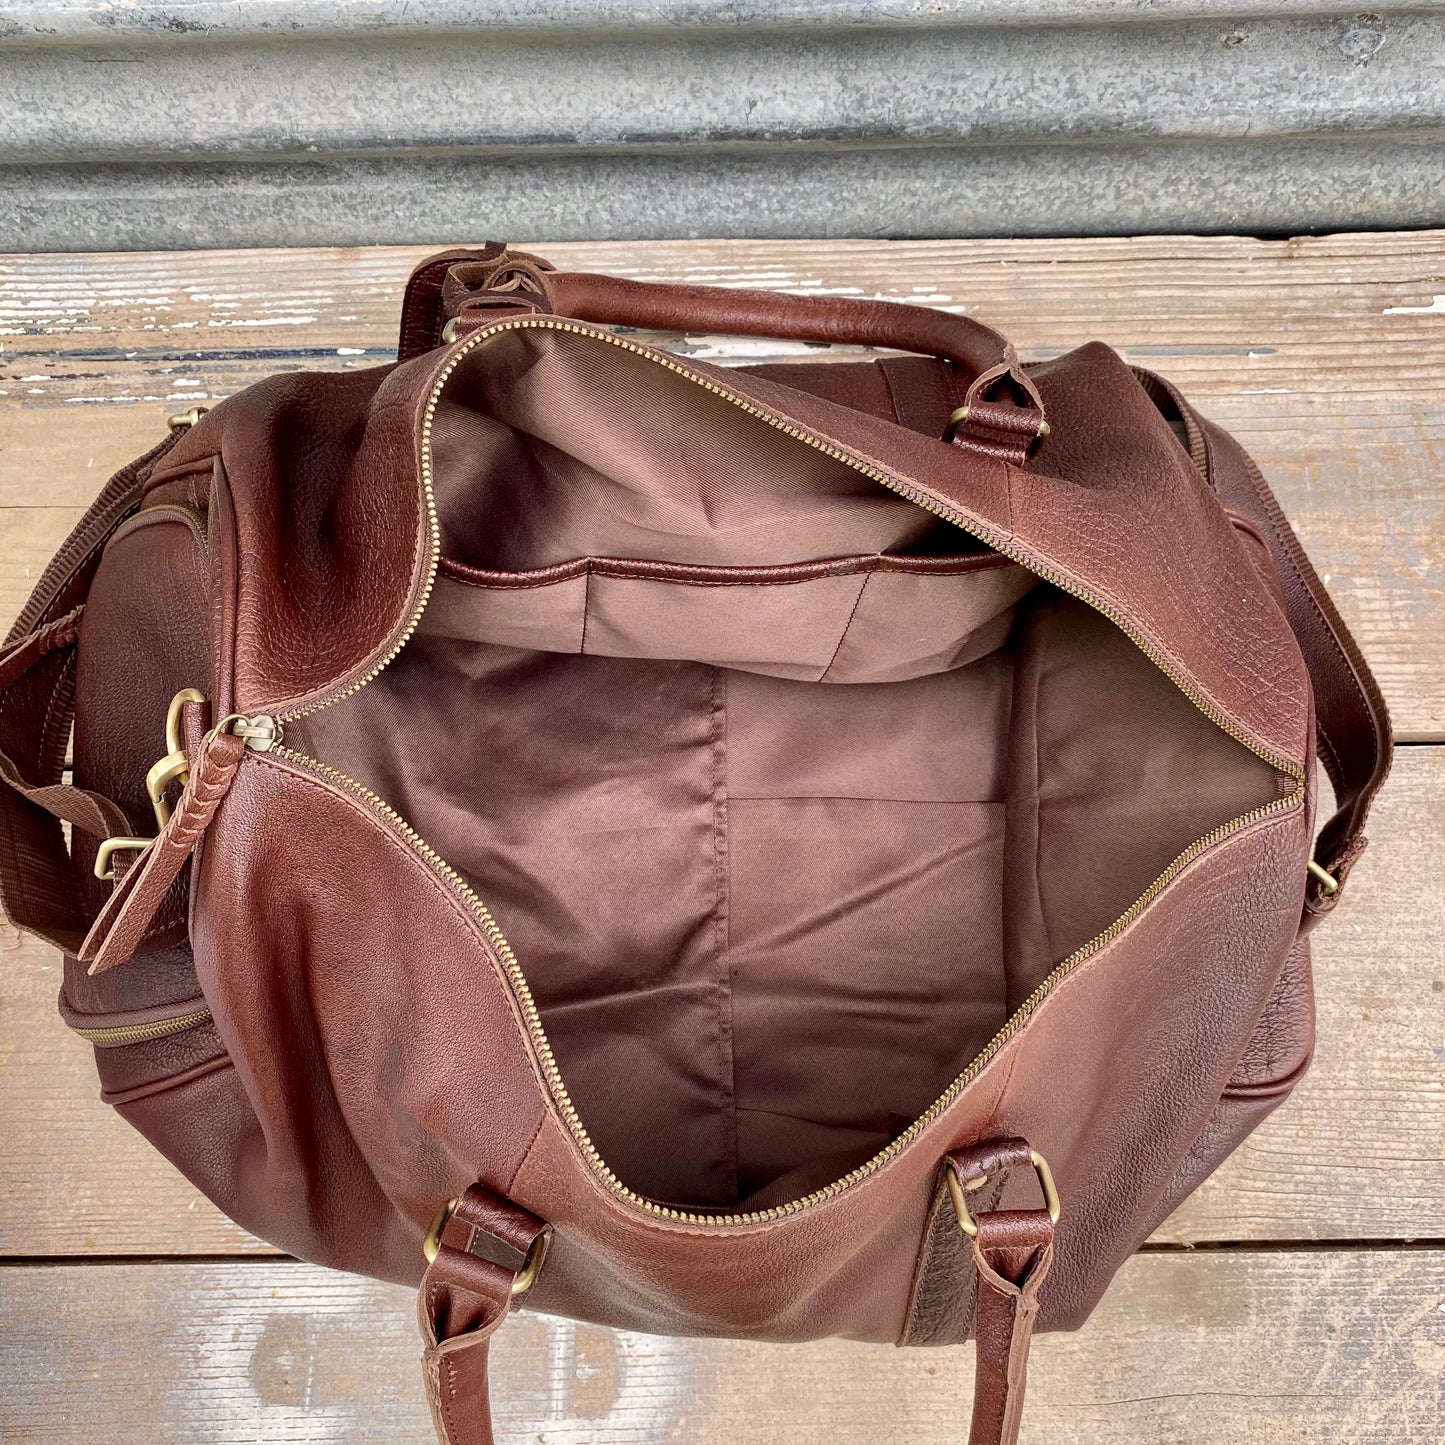 Vintage Leather Duffle/Sports Bag